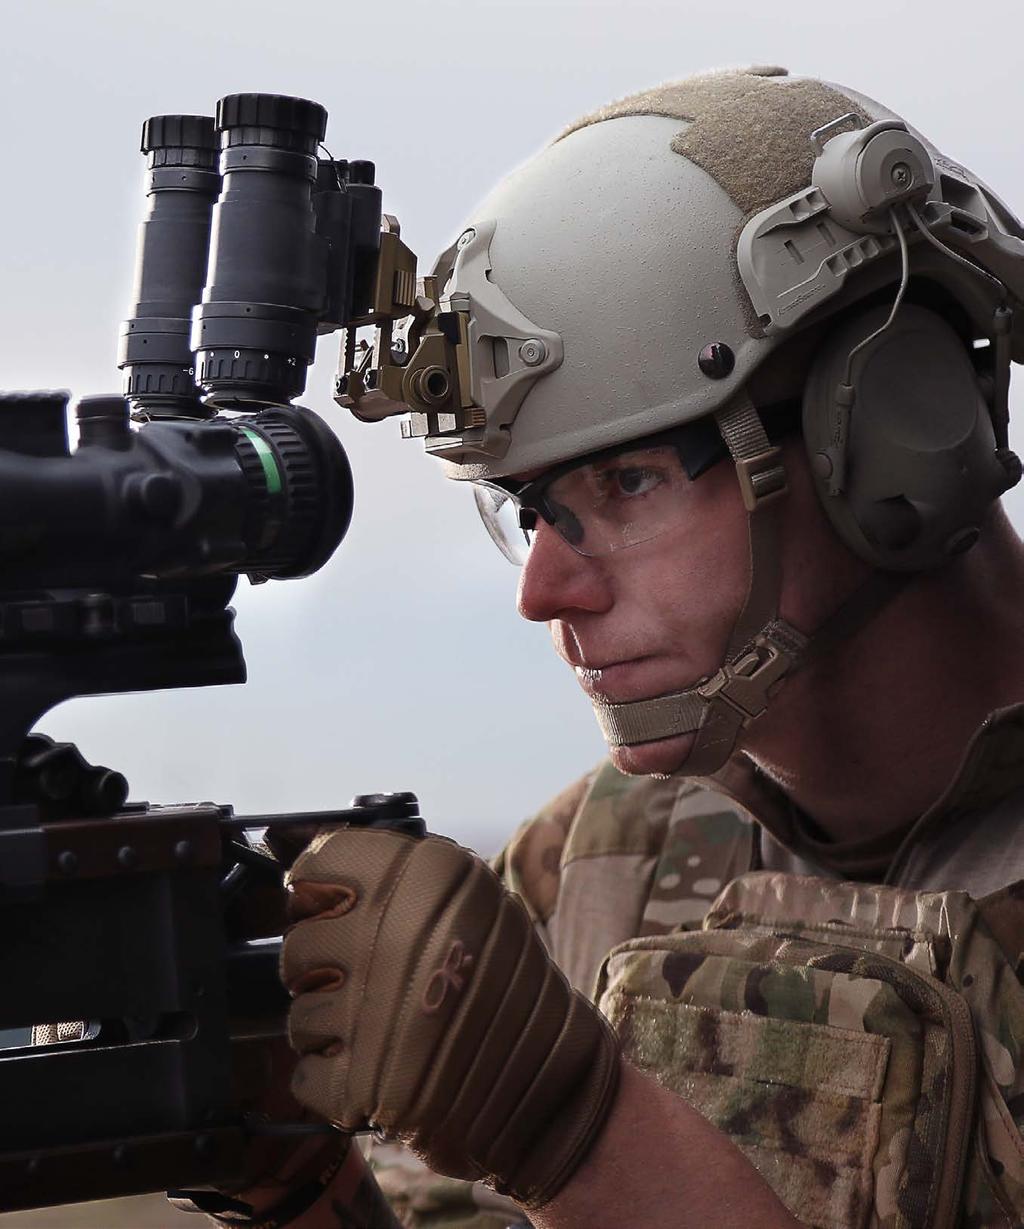 BALLISTIC HEAD PROTECTION An official supplier to the US Department of Defense and NATO forces, ArmorSource offers advanced helmet solutions that are preferred by both law enforcement and